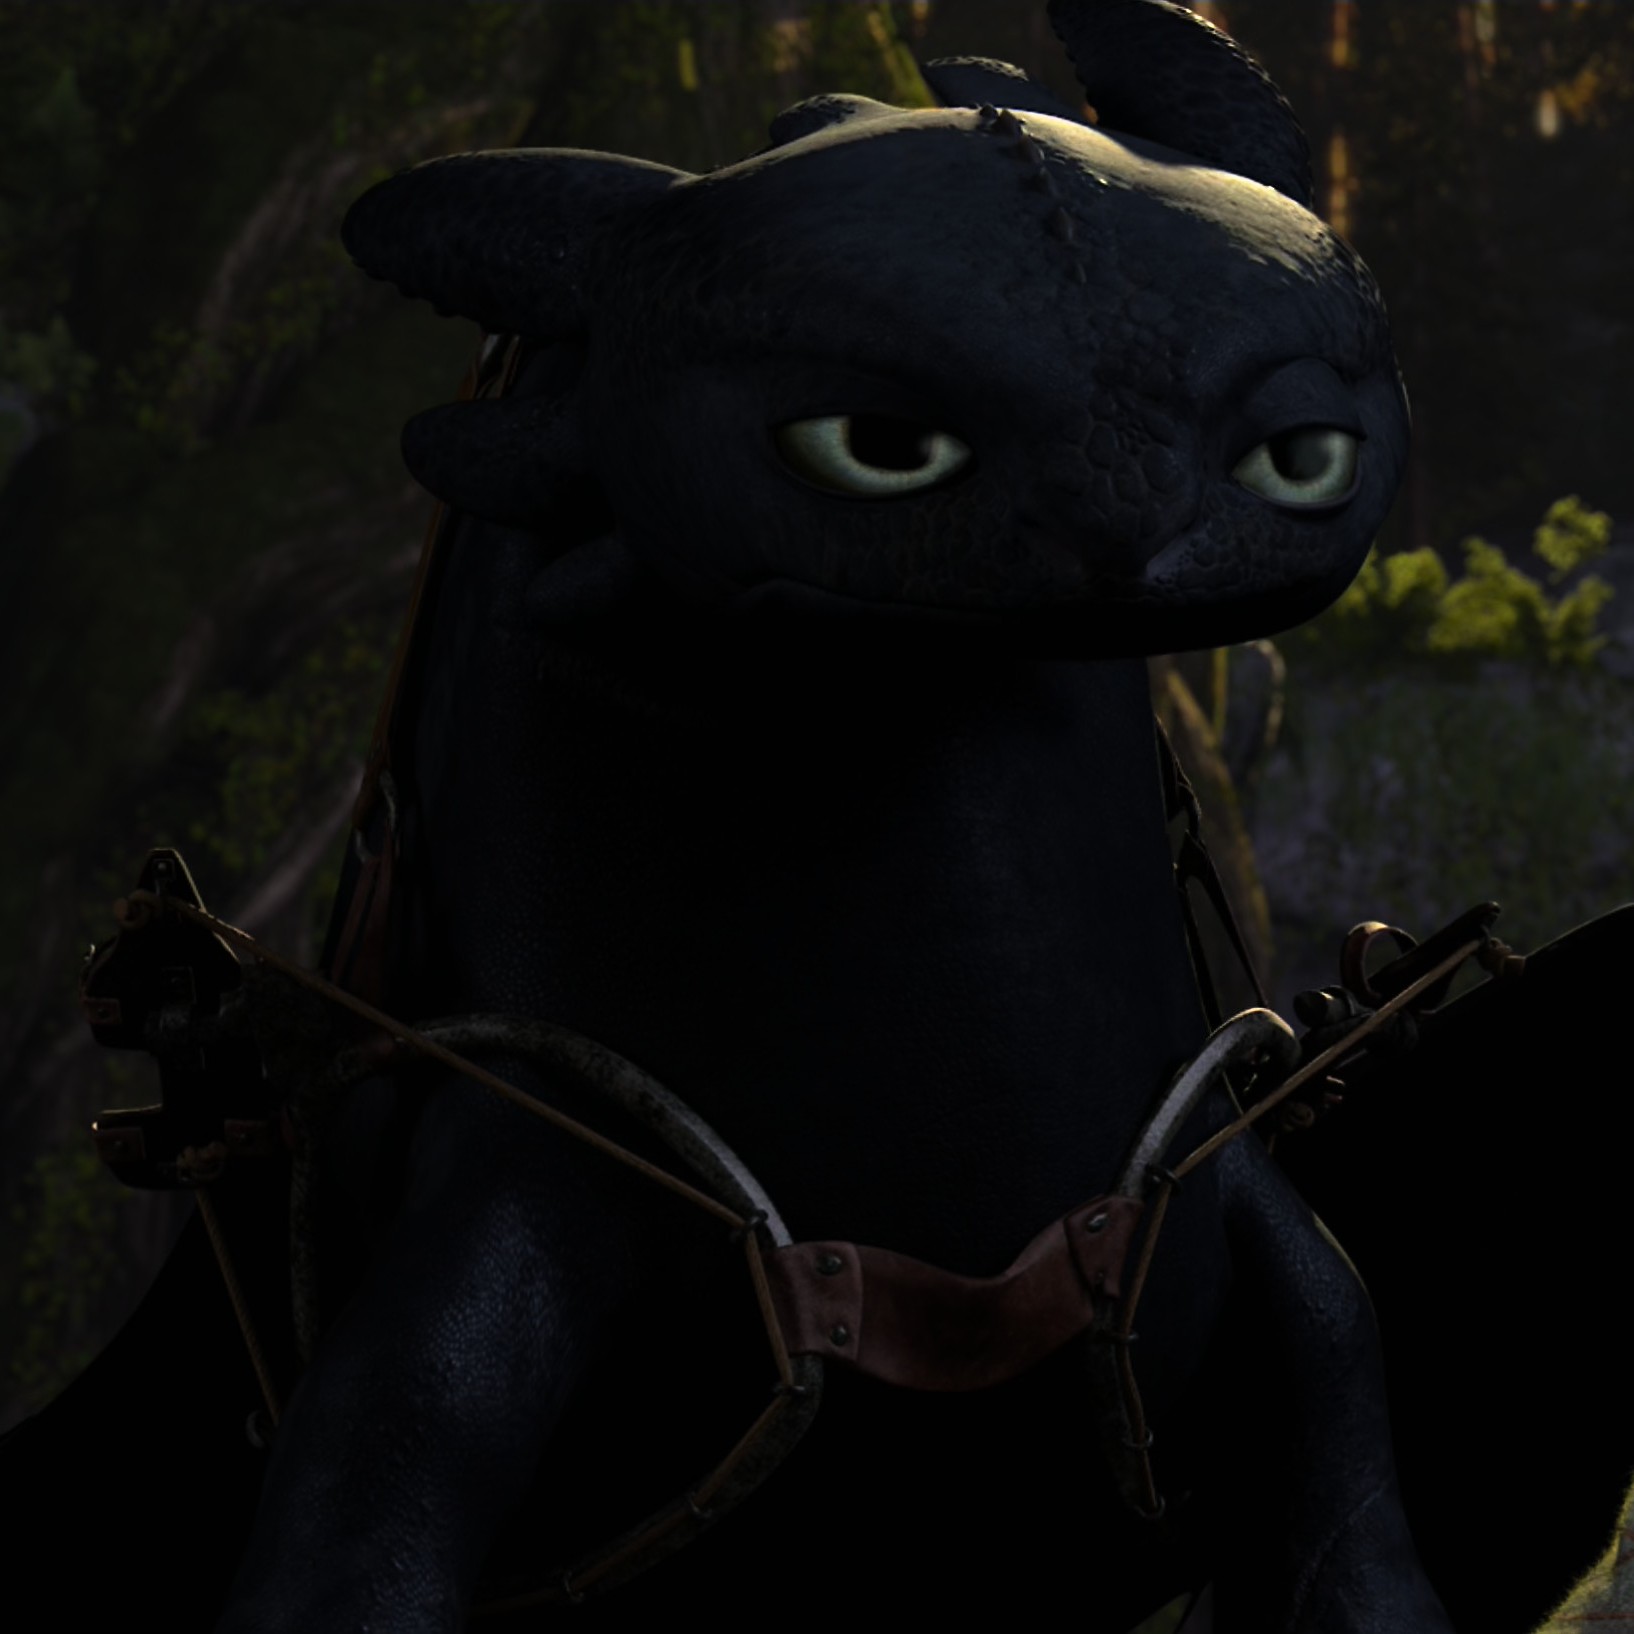 Toothless pic n°1